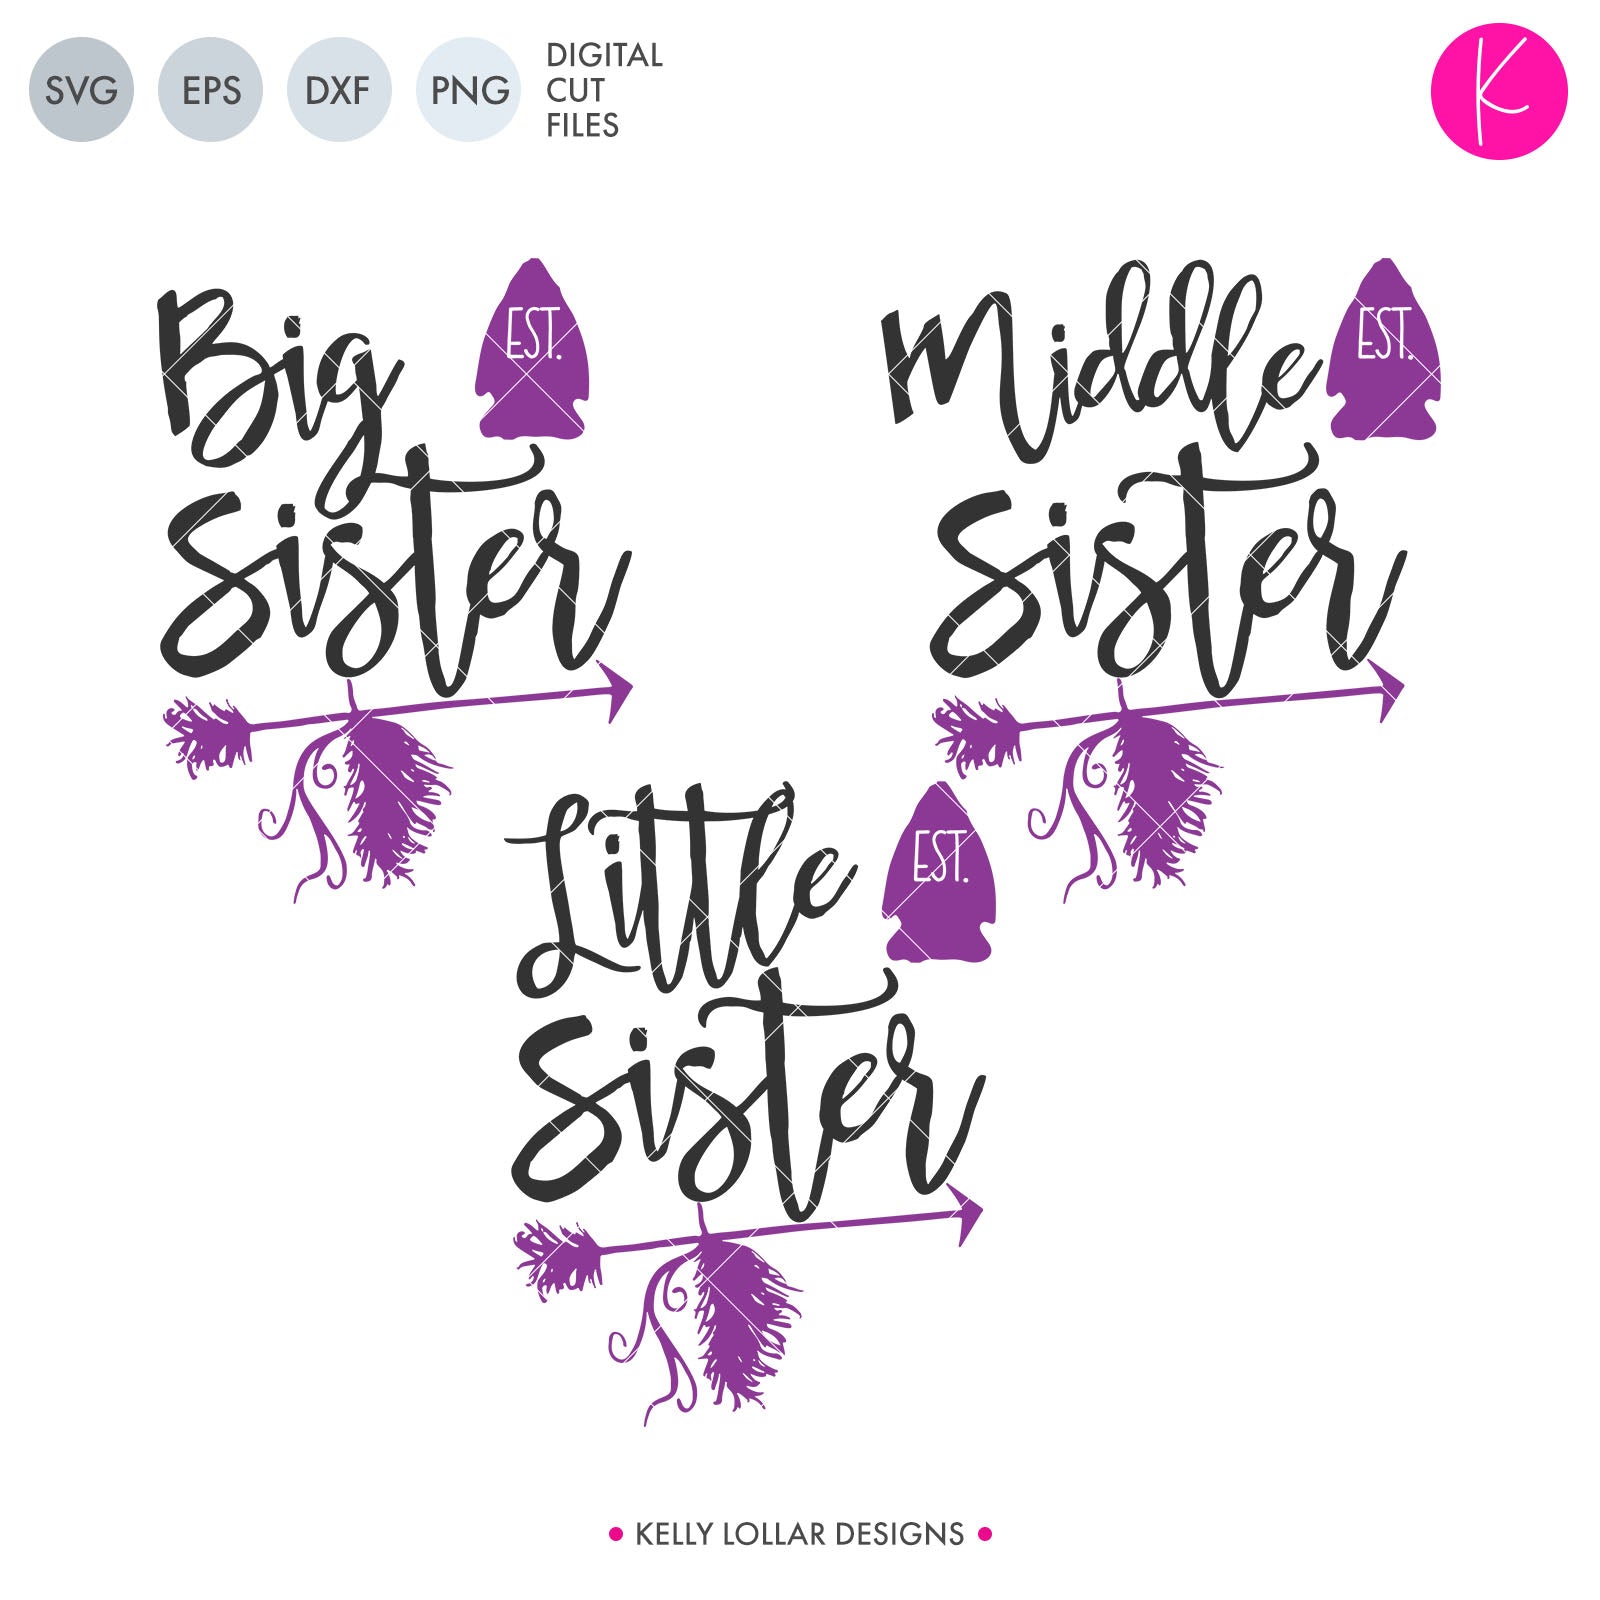 Family SVG DXF EPS PNG Cut Files - Kelly Lollar Designs